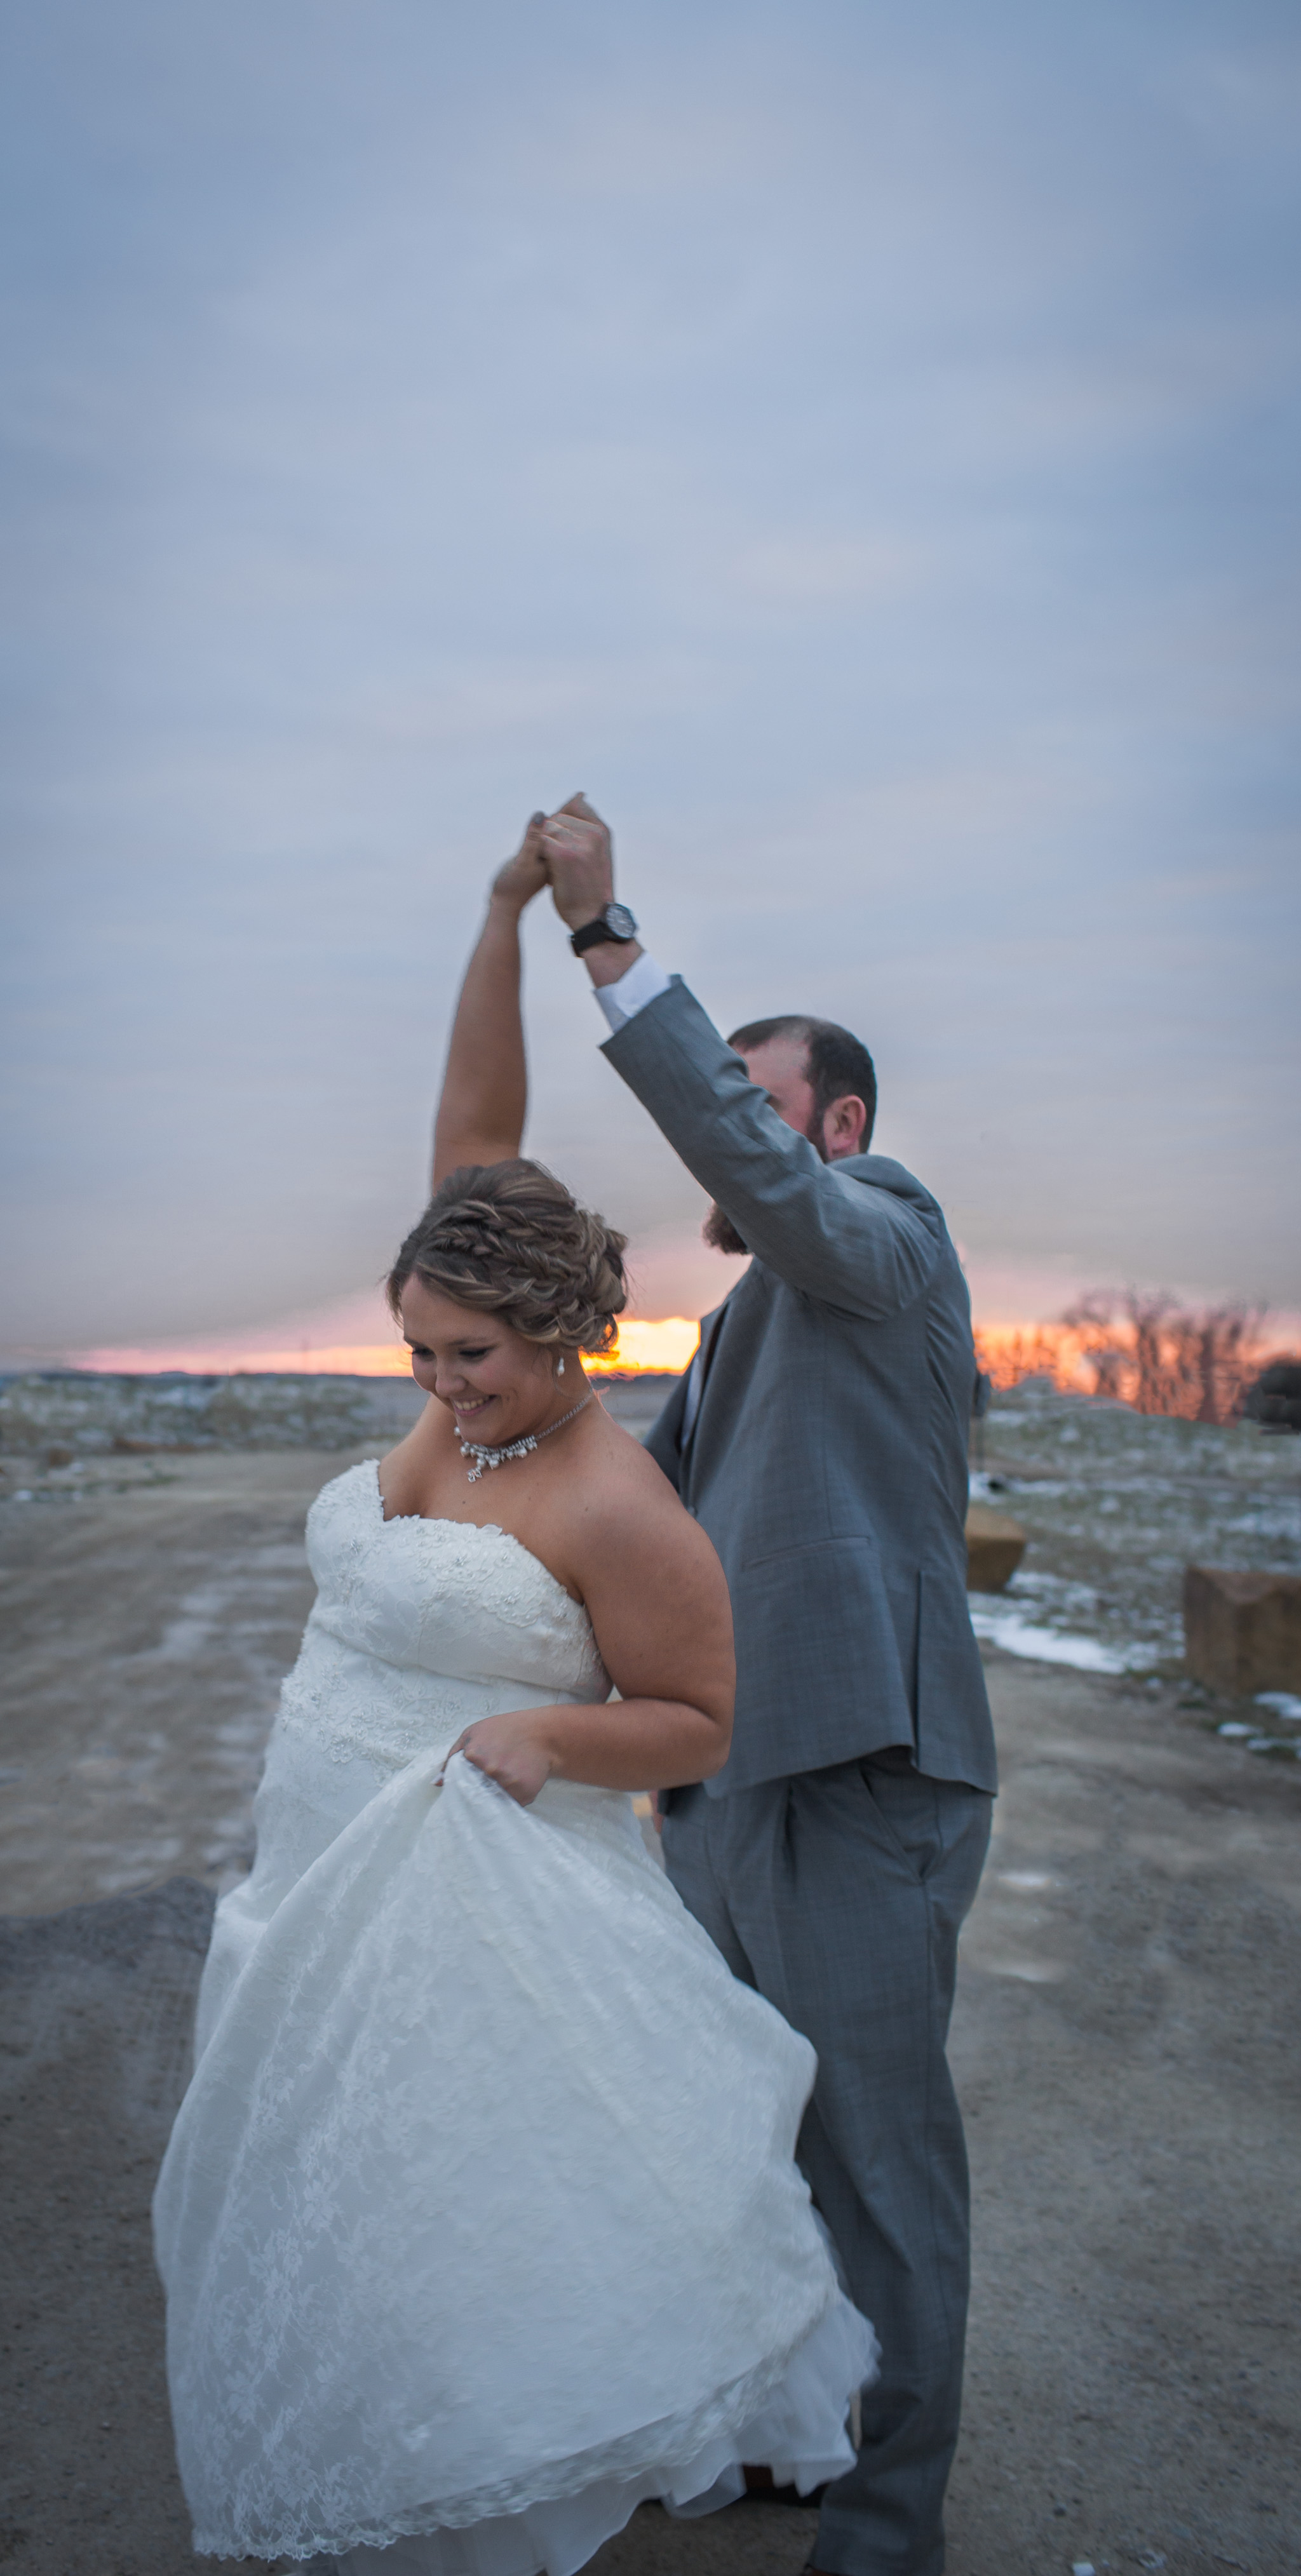 Zibell Spring Wedding, Bride and Groom, Powerful, Connected, Exploration, Laura Duggleby Photography -135.JPG